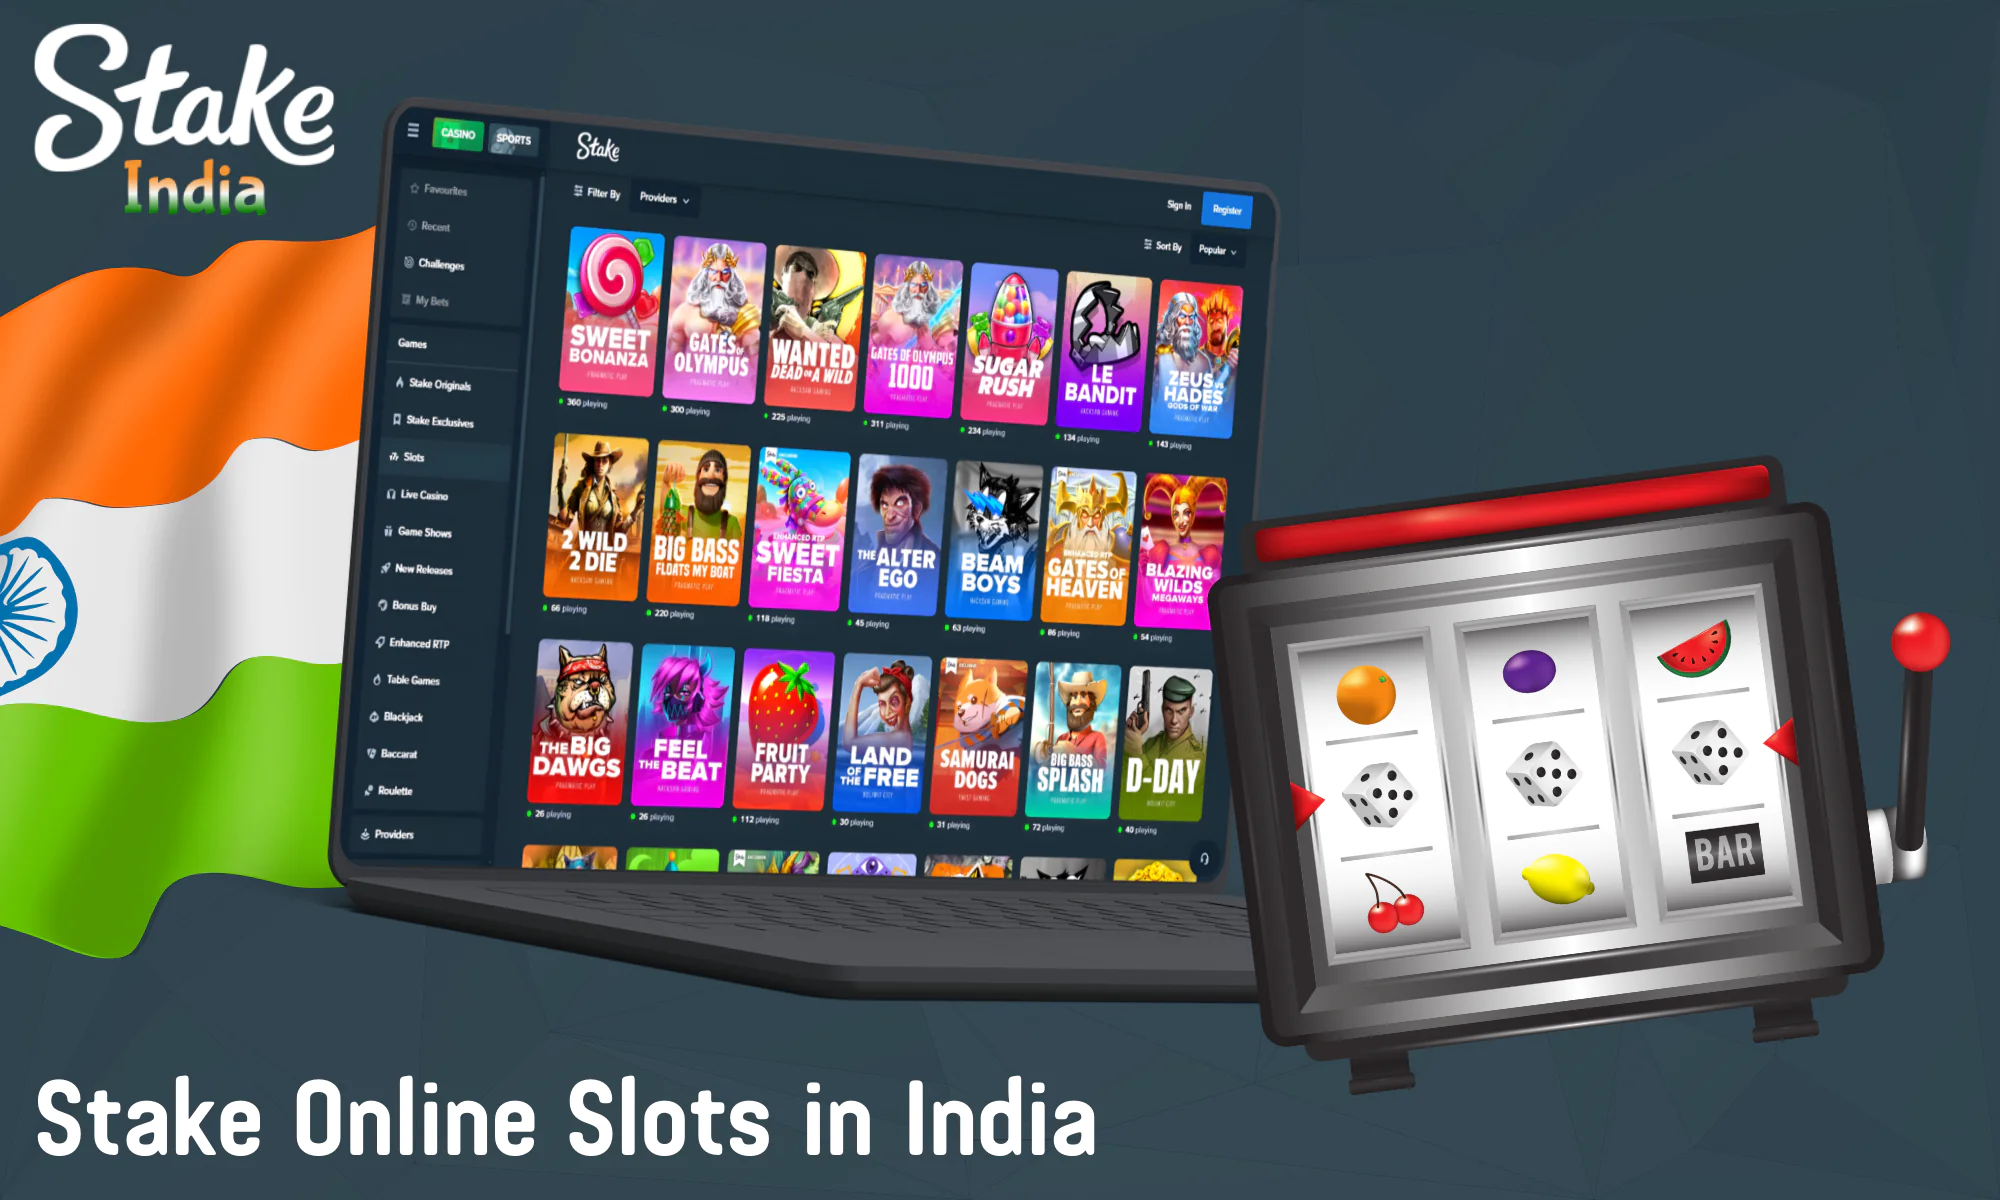 Stake offers many slots with a high percentage of winnings